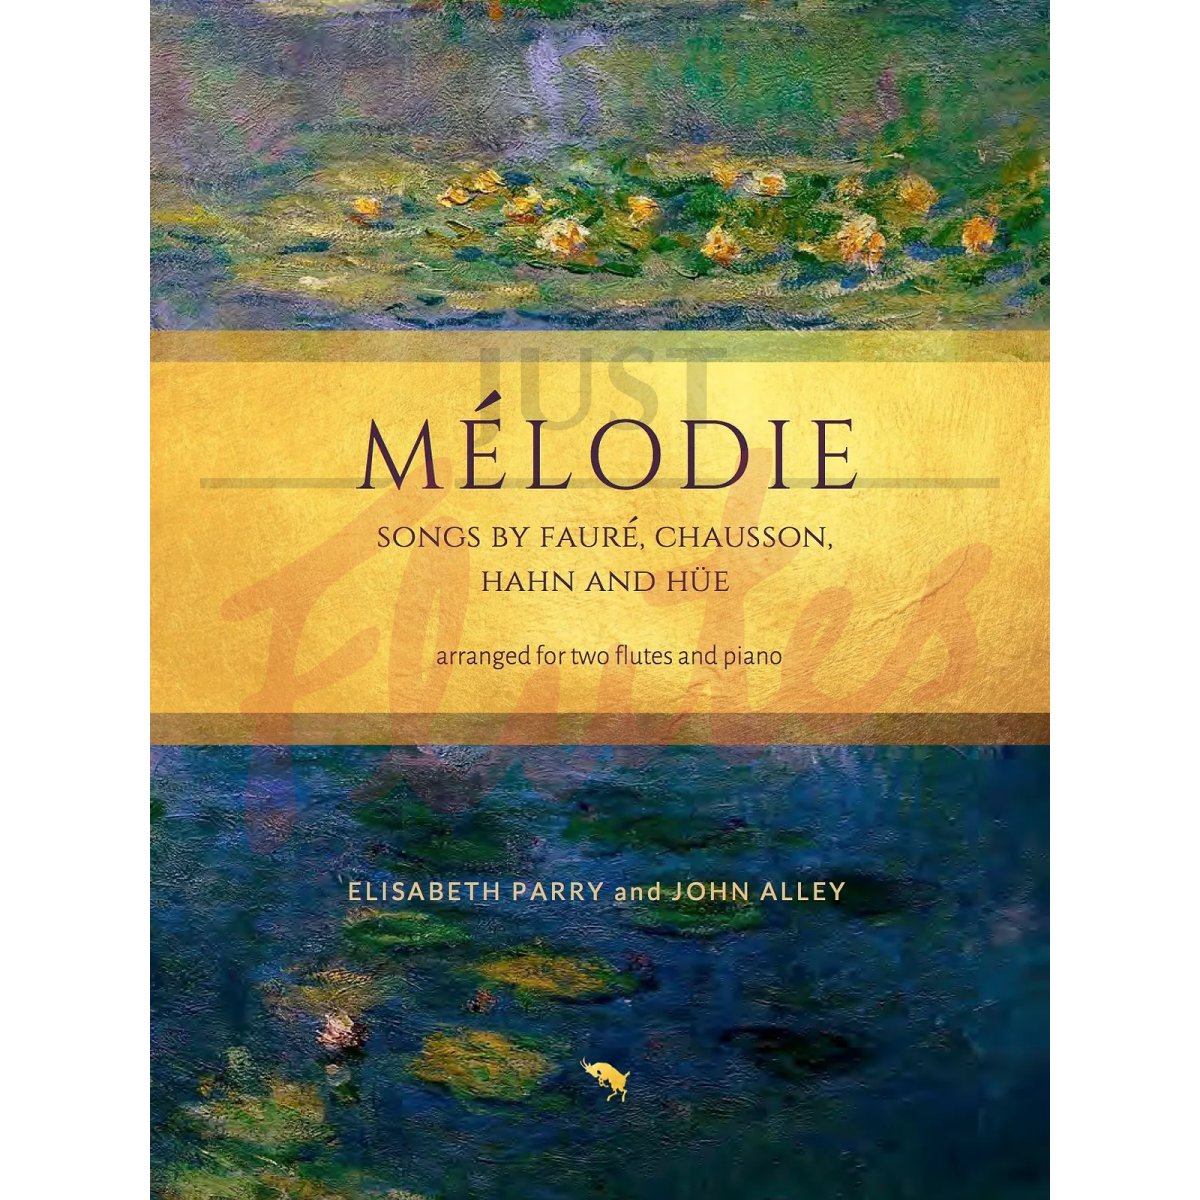 Mélodie: Songs by Fauré, Chausson, Hahn and Hüe arranged for Two Flutes and Piano